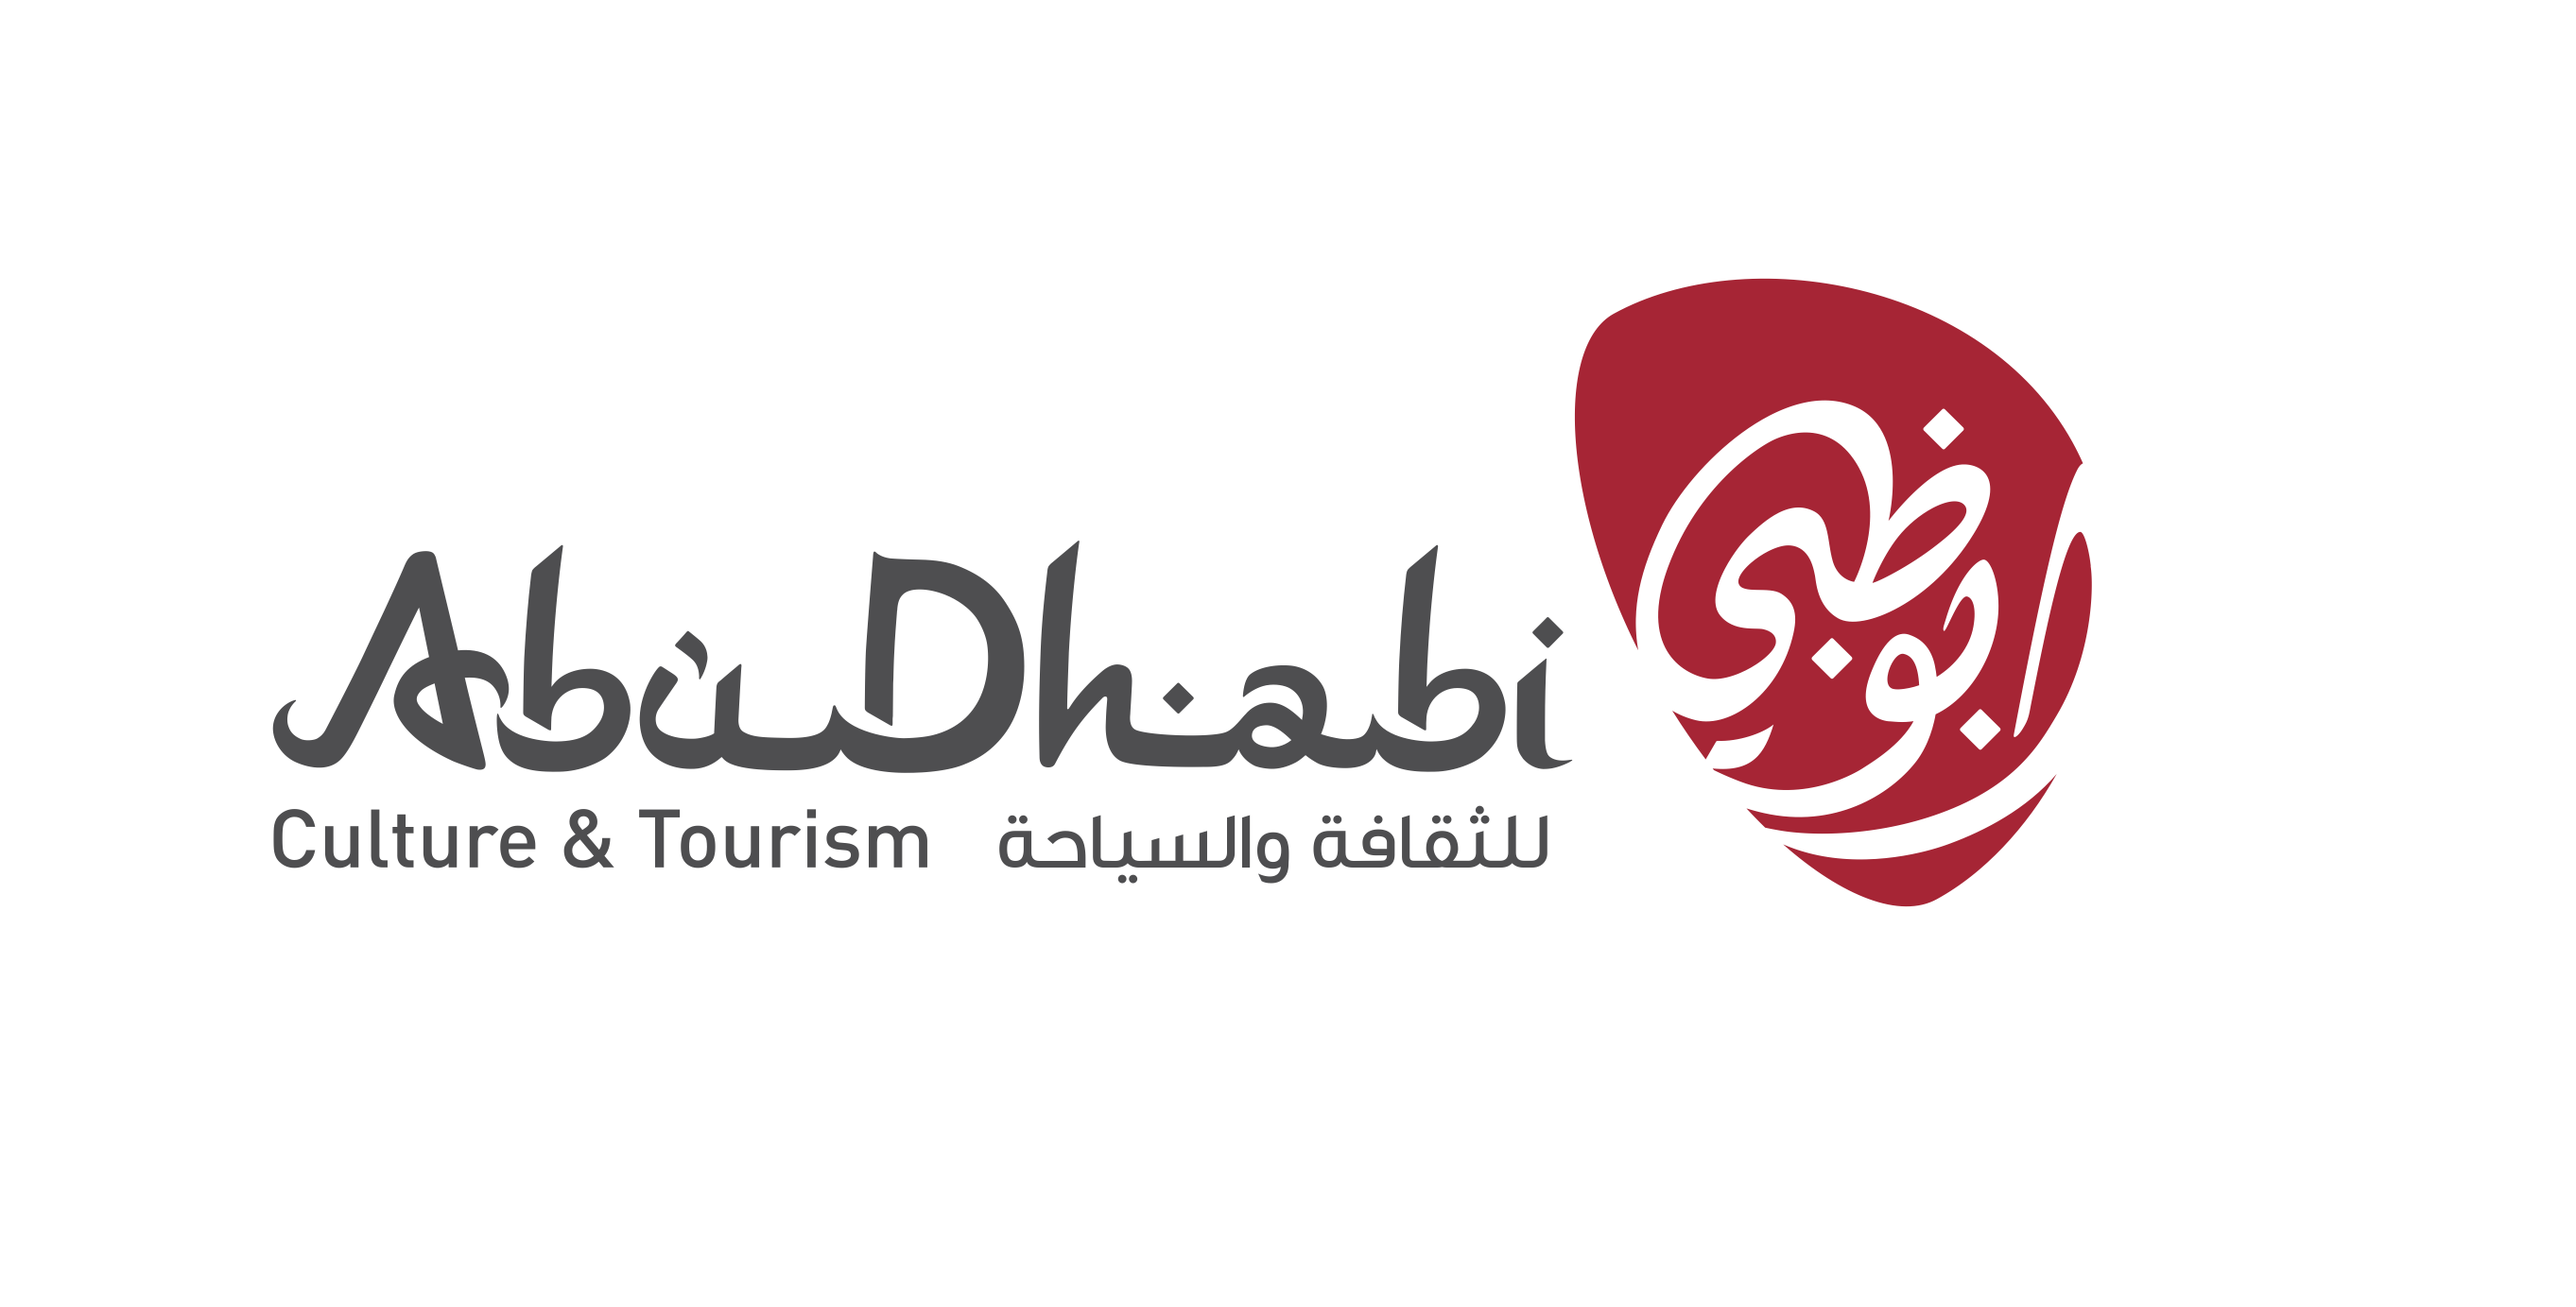 department for culture and tourism abu dhabi